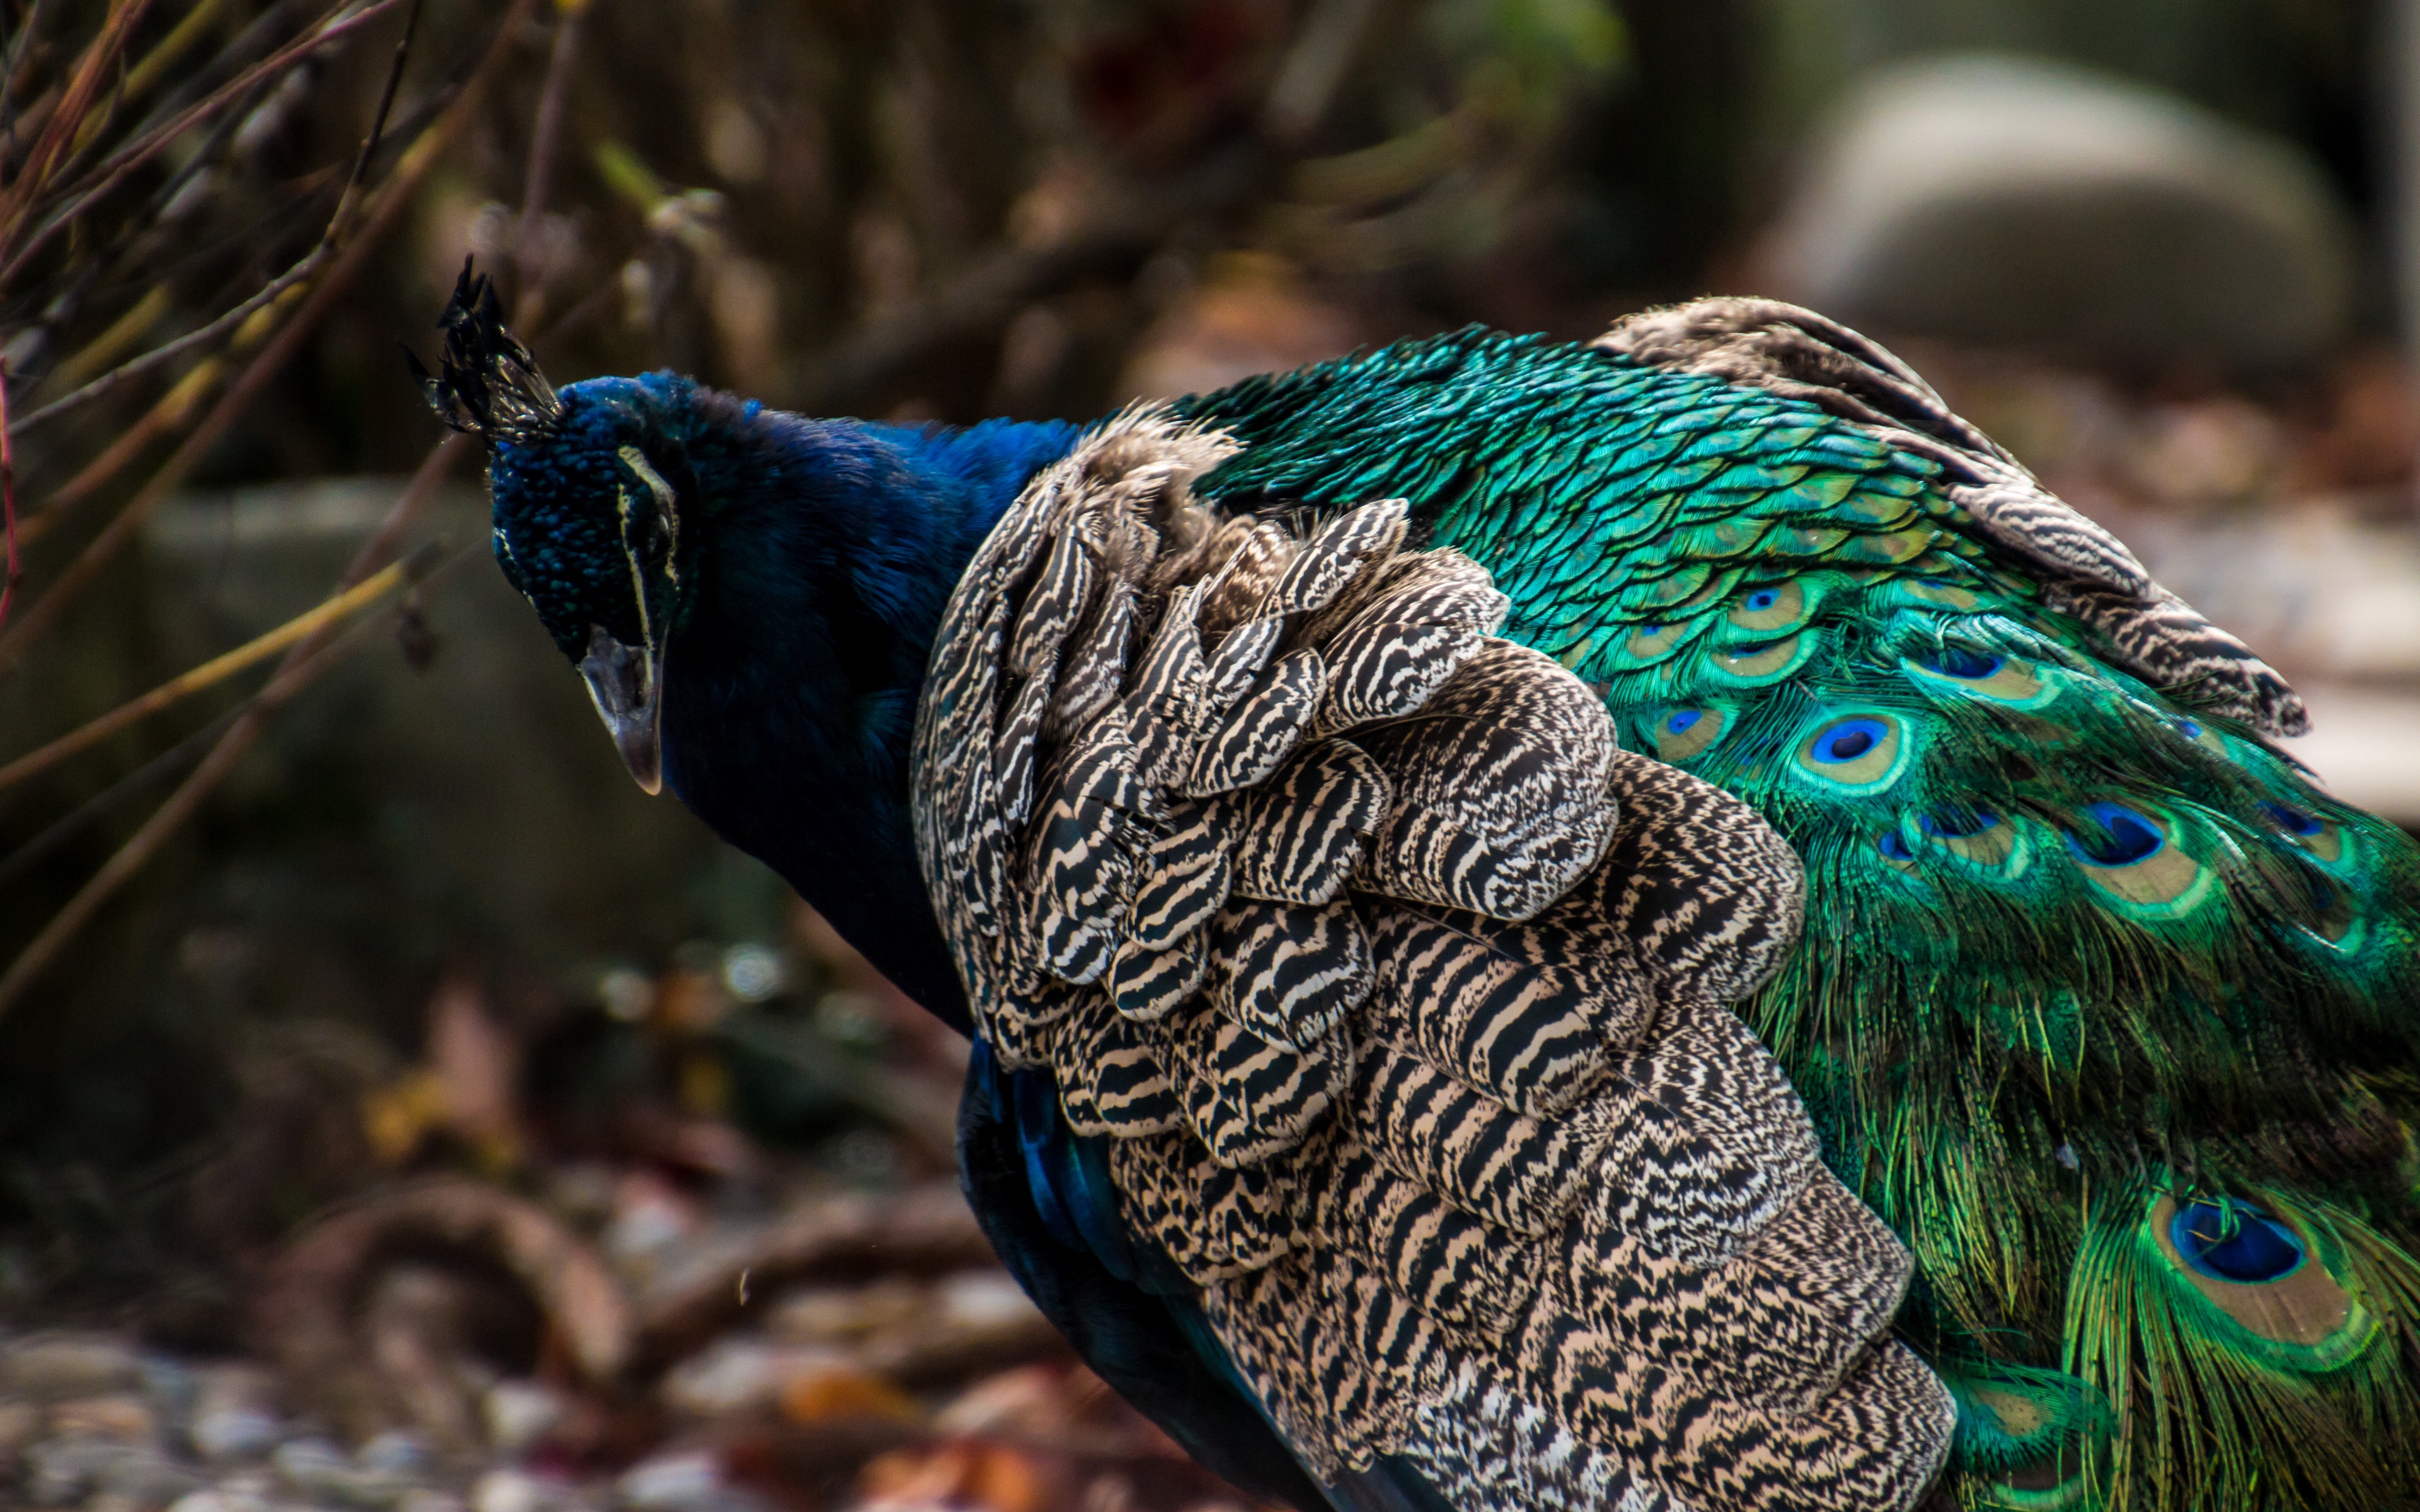 Wallpaper Peacock, Bird, Feathers, Color, Bright - 4k Ultra Hd Wallpaper Peacock - HD Wallpaper 